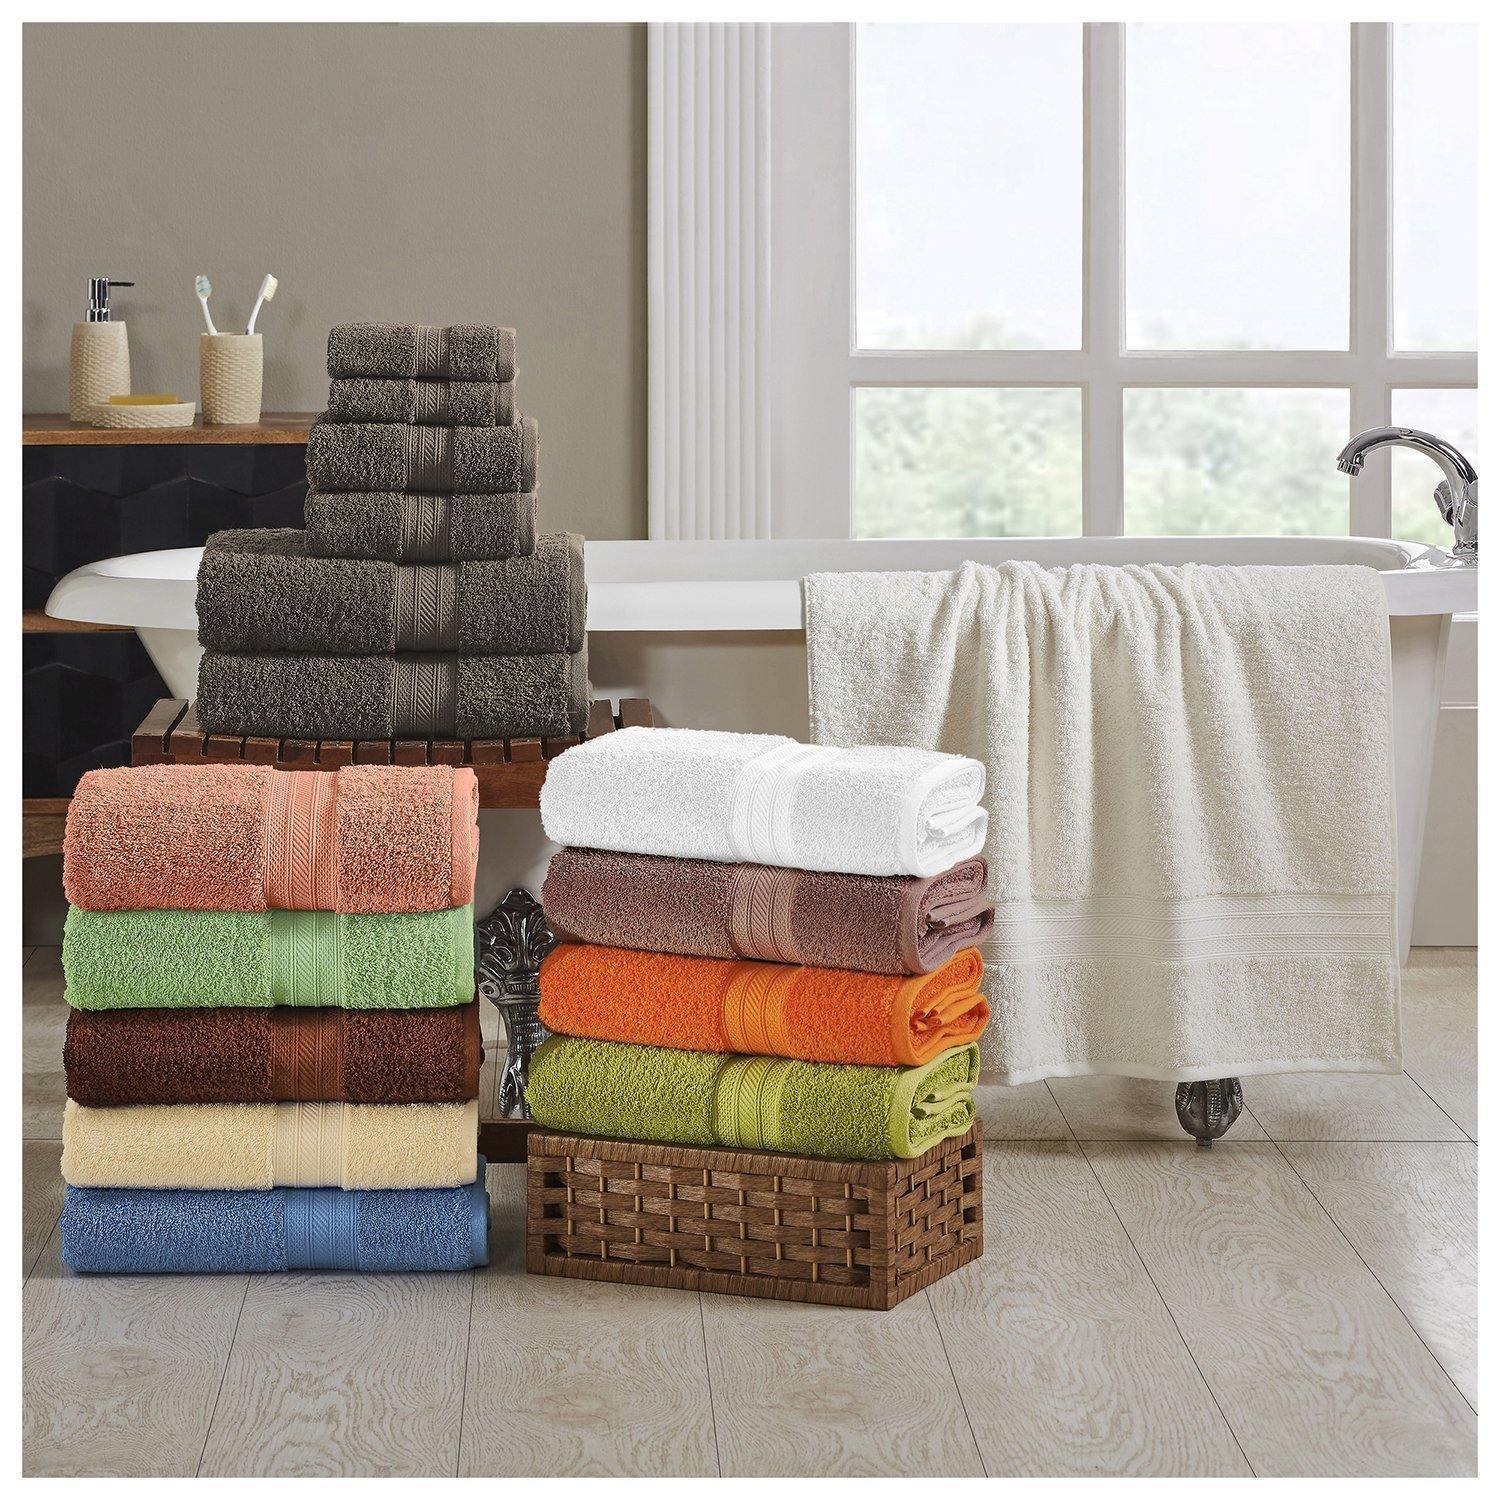 700 GSM Plush Absorbent Long Staple Combed Cotton 6-Piece Towel Set FredCo